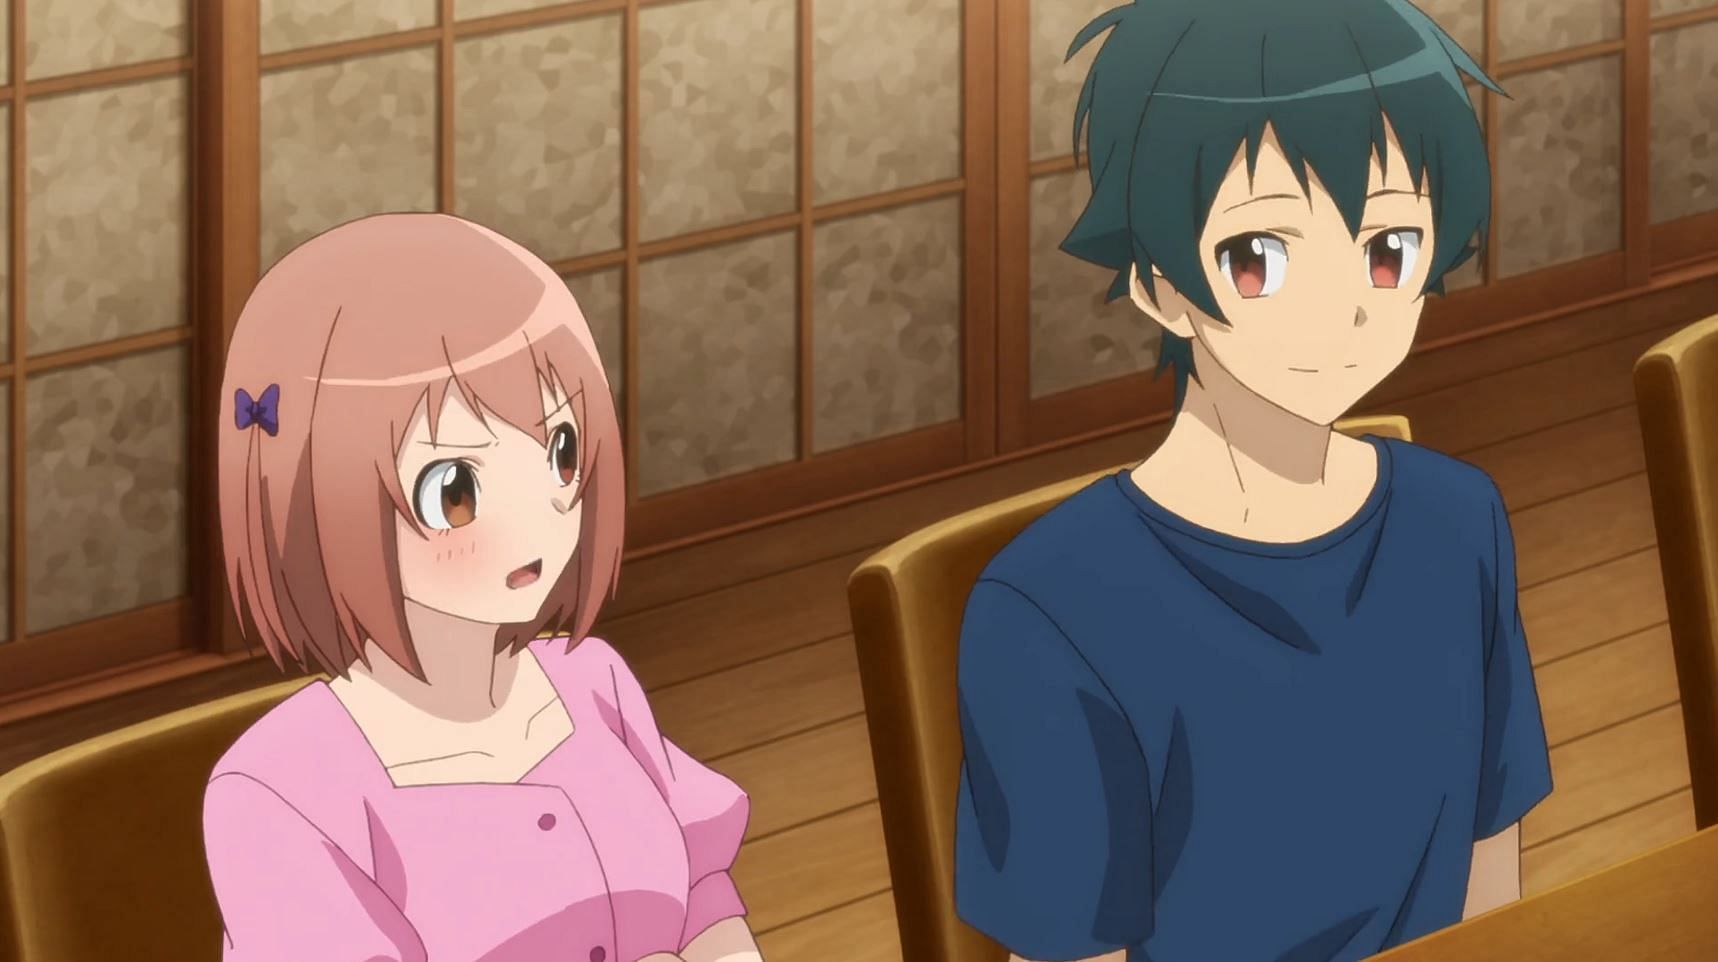 Maou and Chiho from The Devil is a Part-Timer!! (Image via Studio 3Hz)